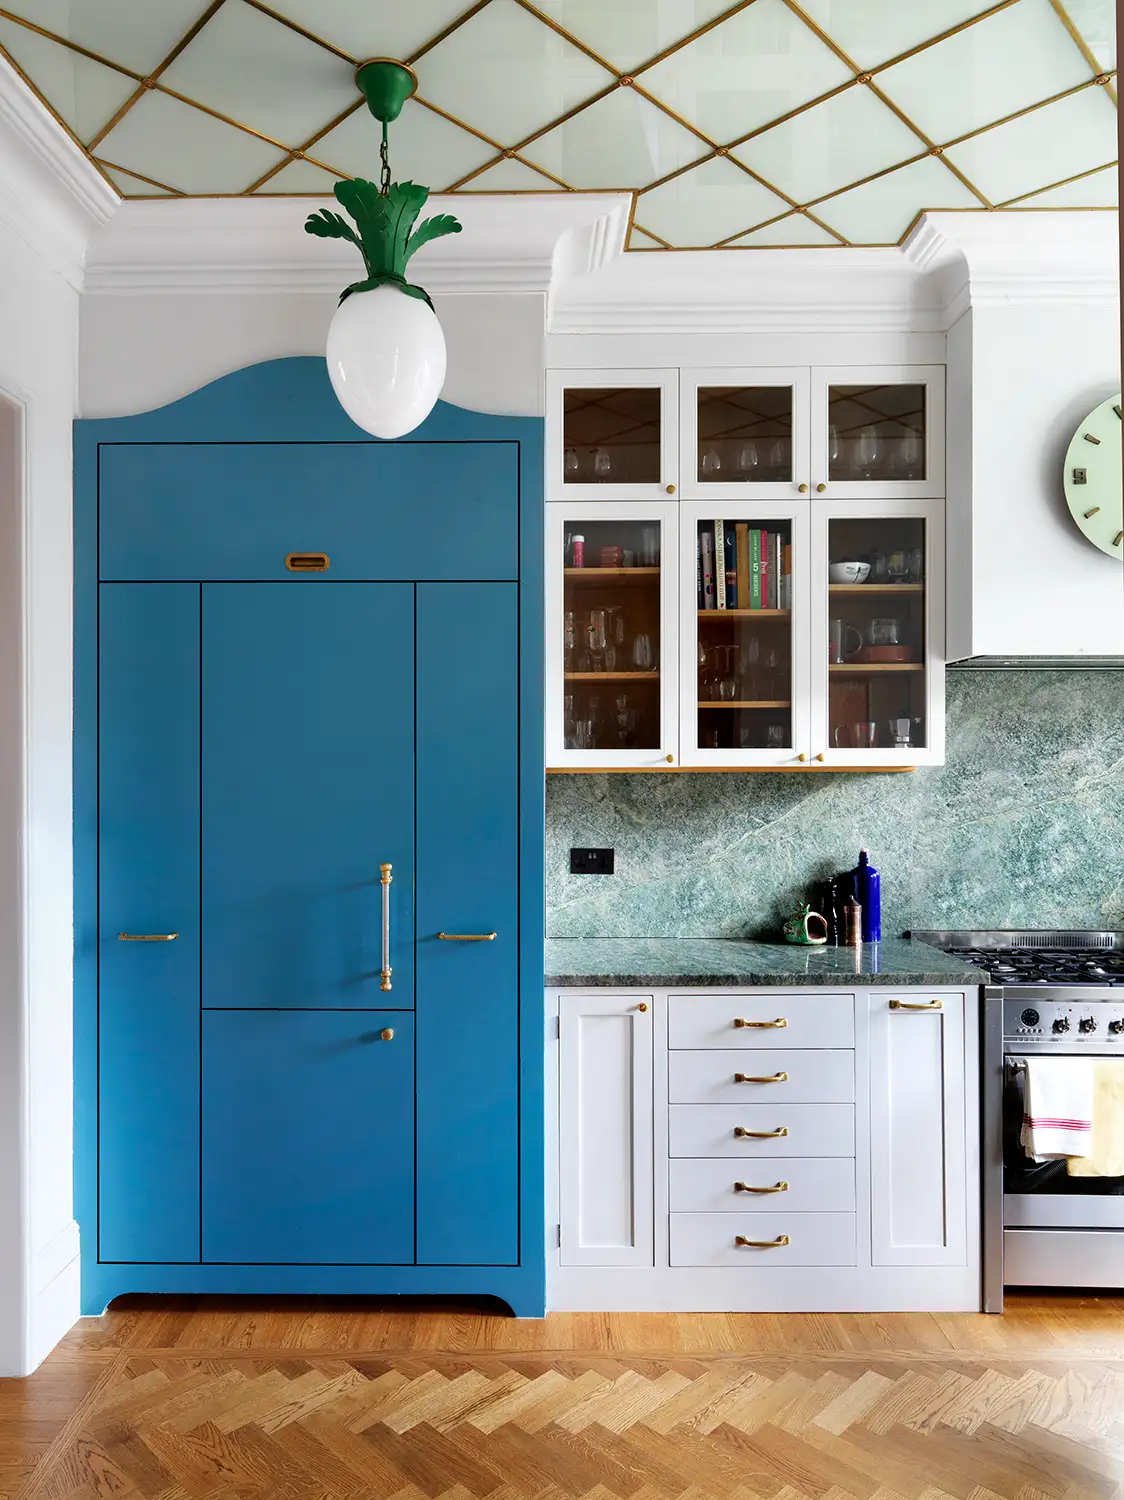 A kitchen with a big blue cabinet and and an amazing glass ceiling